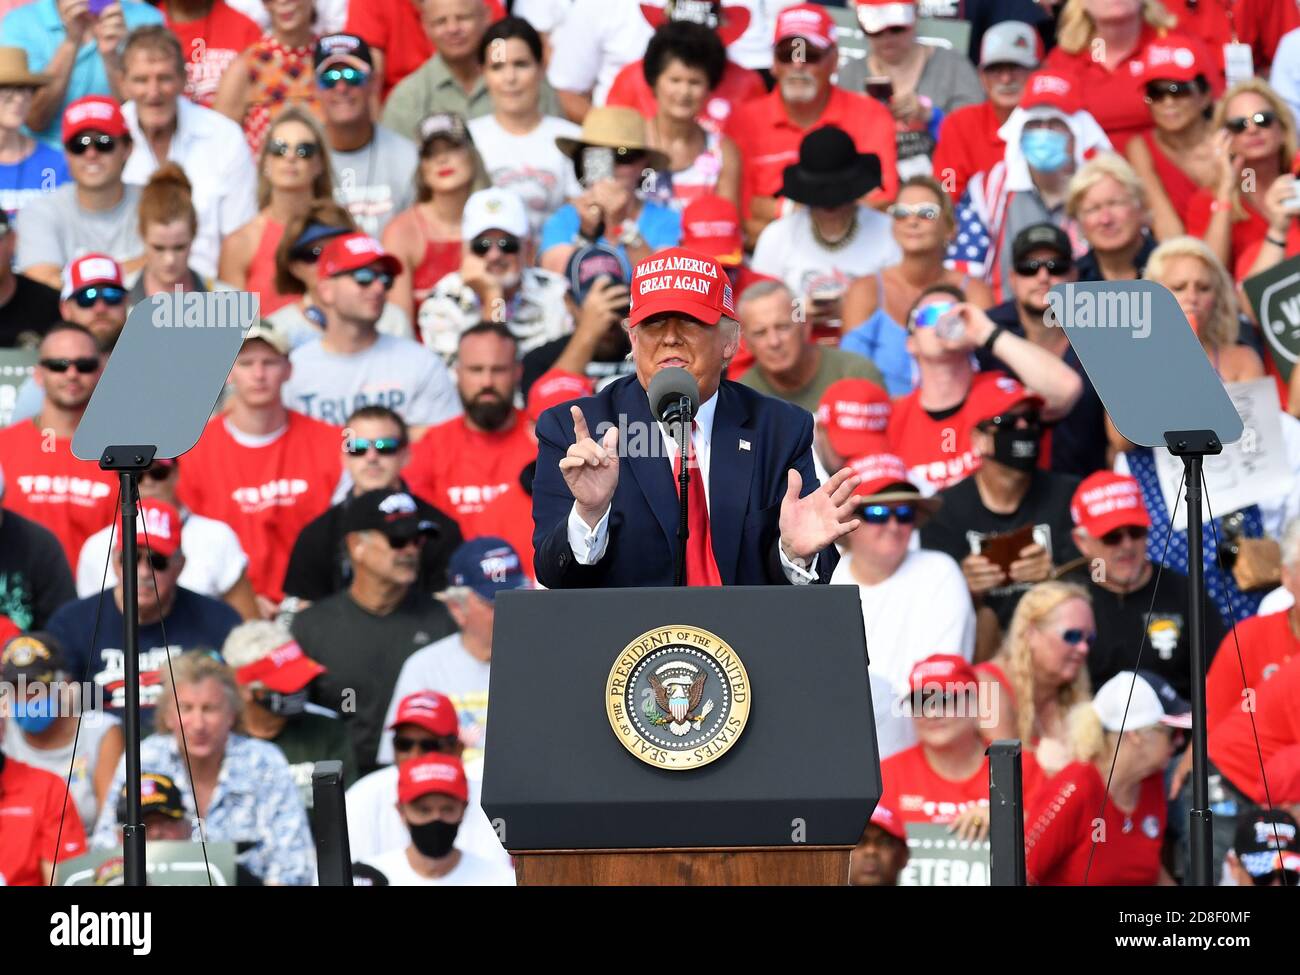 October 29, 2020 - Tampa, Florida, United States - U.S. President Donald Trump addresses supporters at a campaign rally outside Raymond James Stadium on October 29, 2020 in Tampa, Florida. With 5 days until the November 3 election, Trump continues to campaign in swing states against Democratic presidential nominee Joe Biden. (Paul Hennessy/Alamy) Credit: Paul Hennessy/Alamy Live News Stock Photo